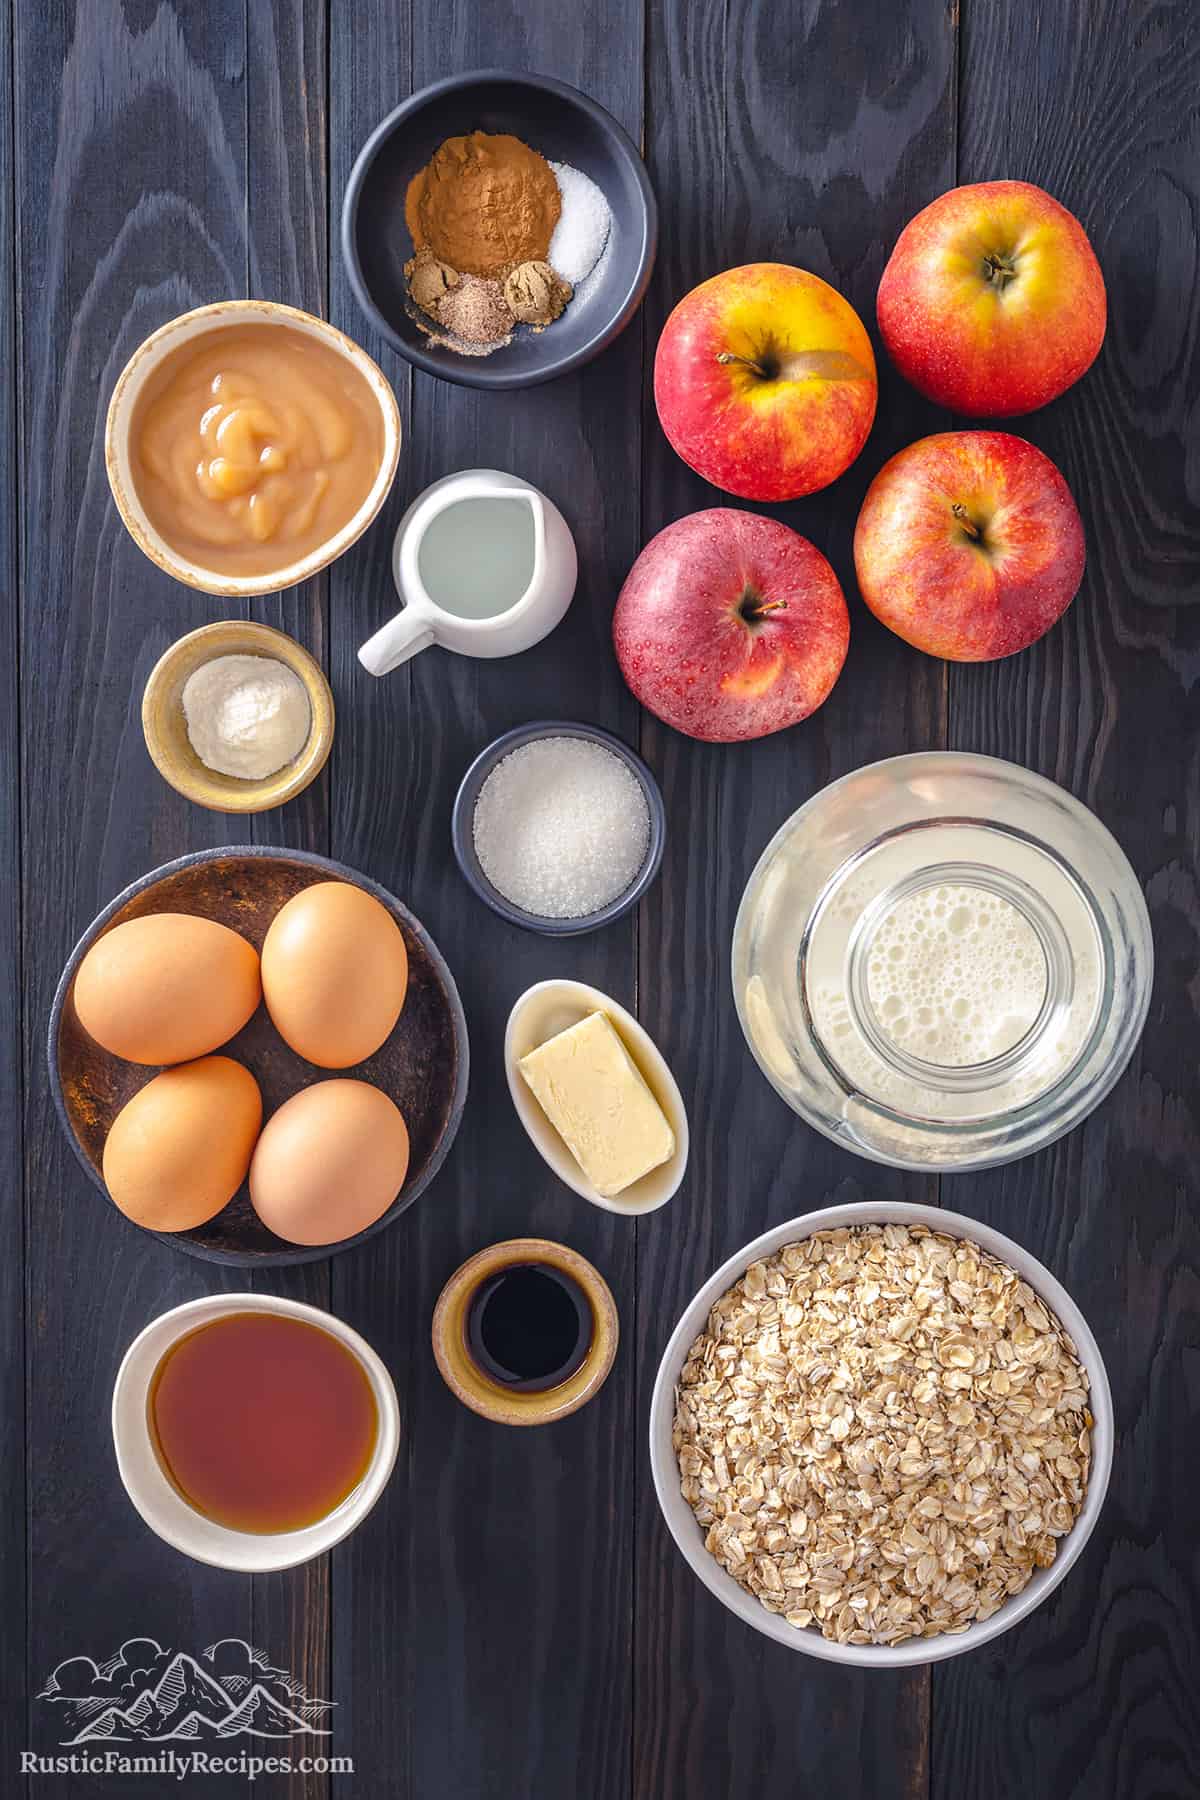 Ingredients for apple cinnamon baked oatmeal on a wood table